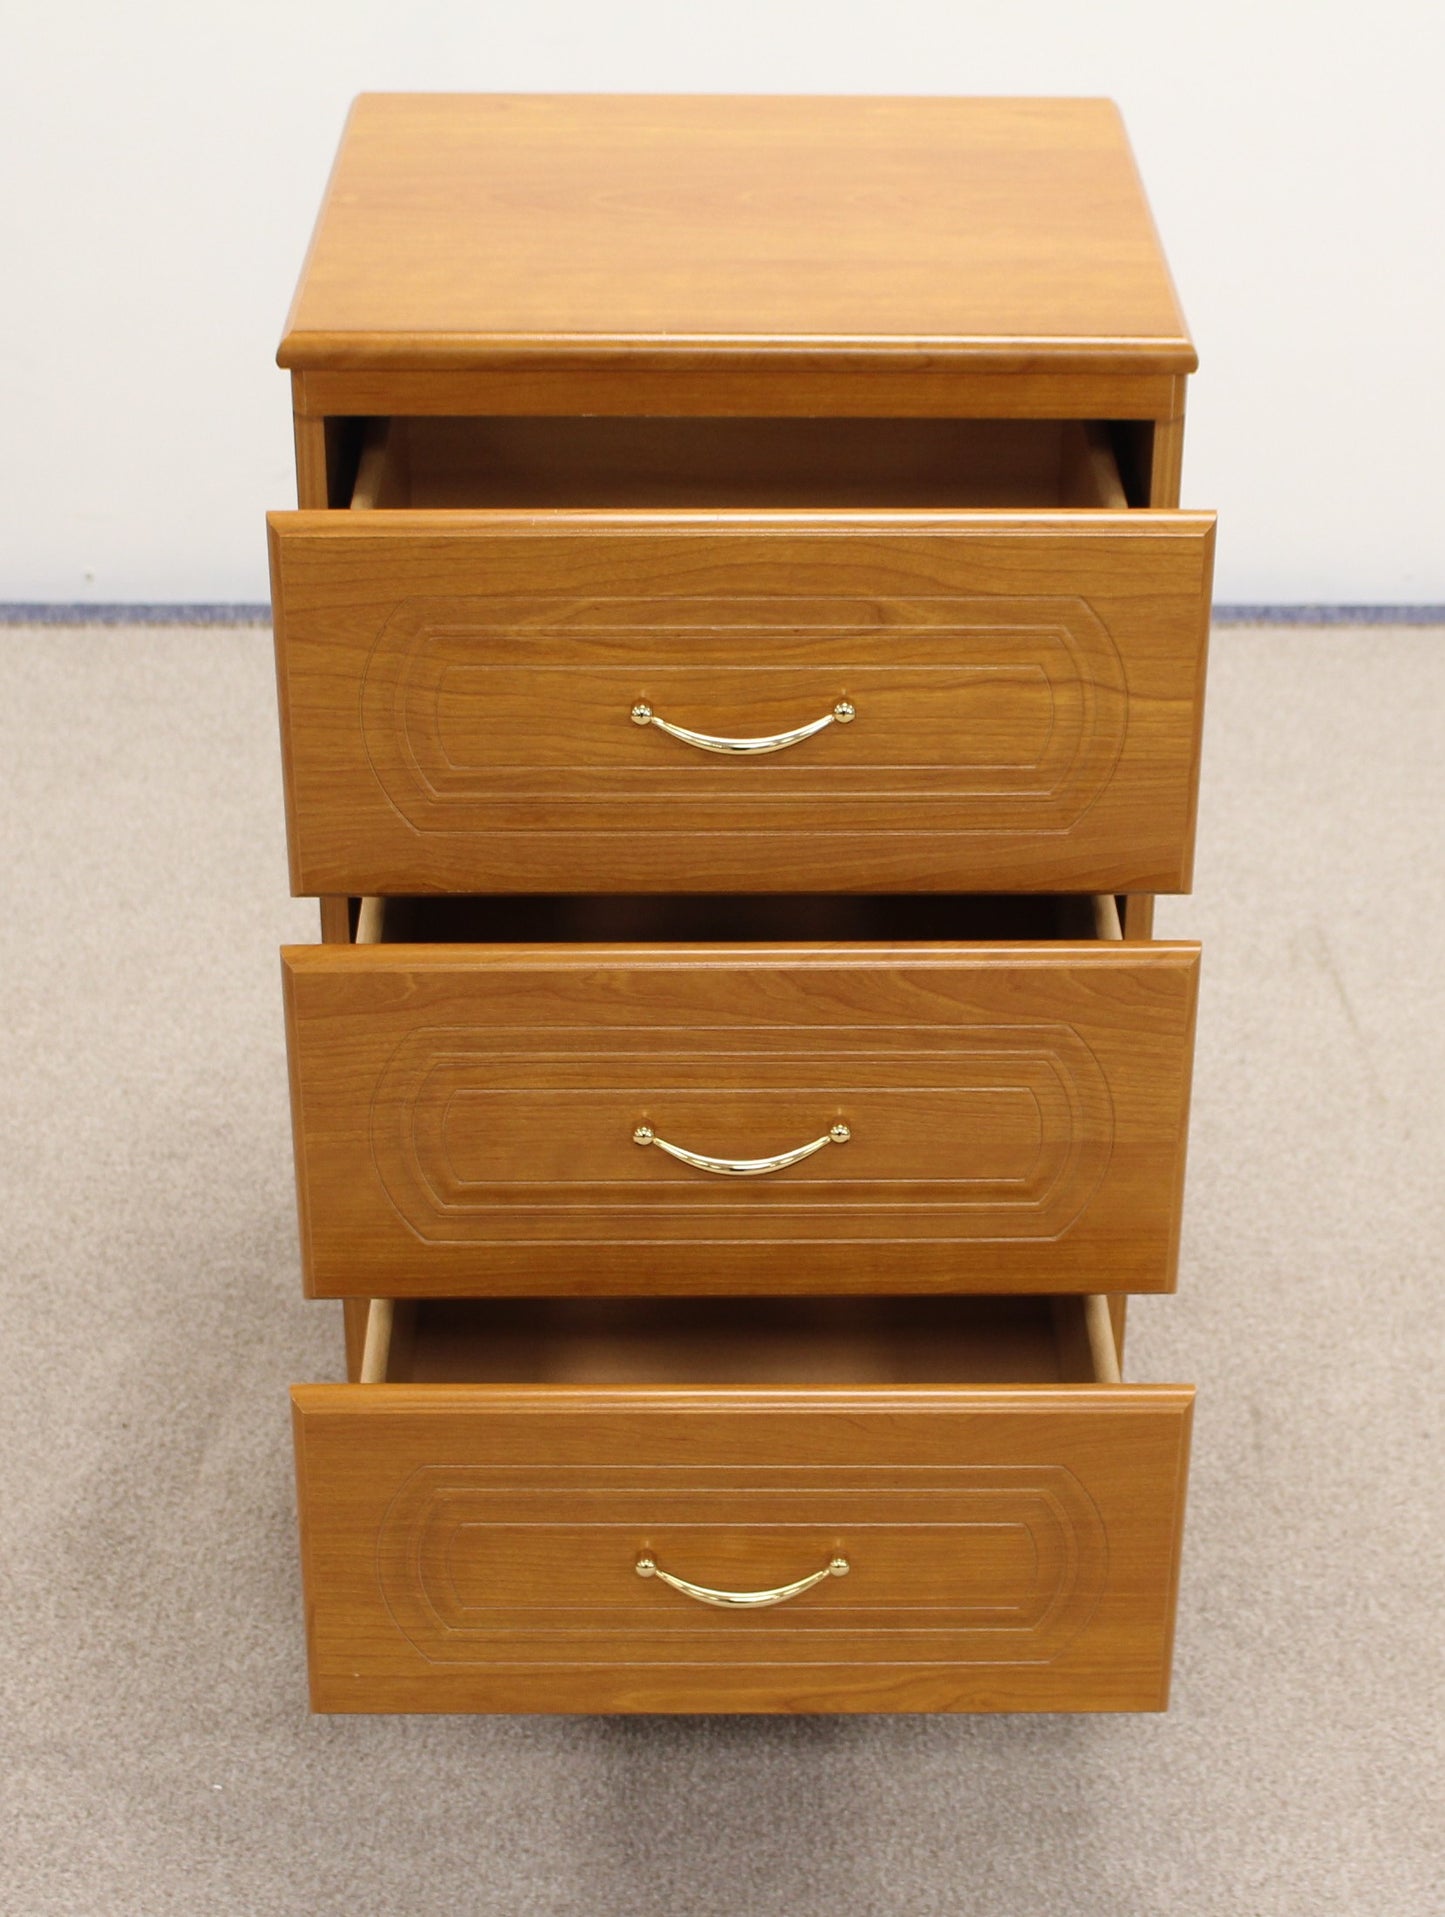 Matching Bedside Chest of Drawers